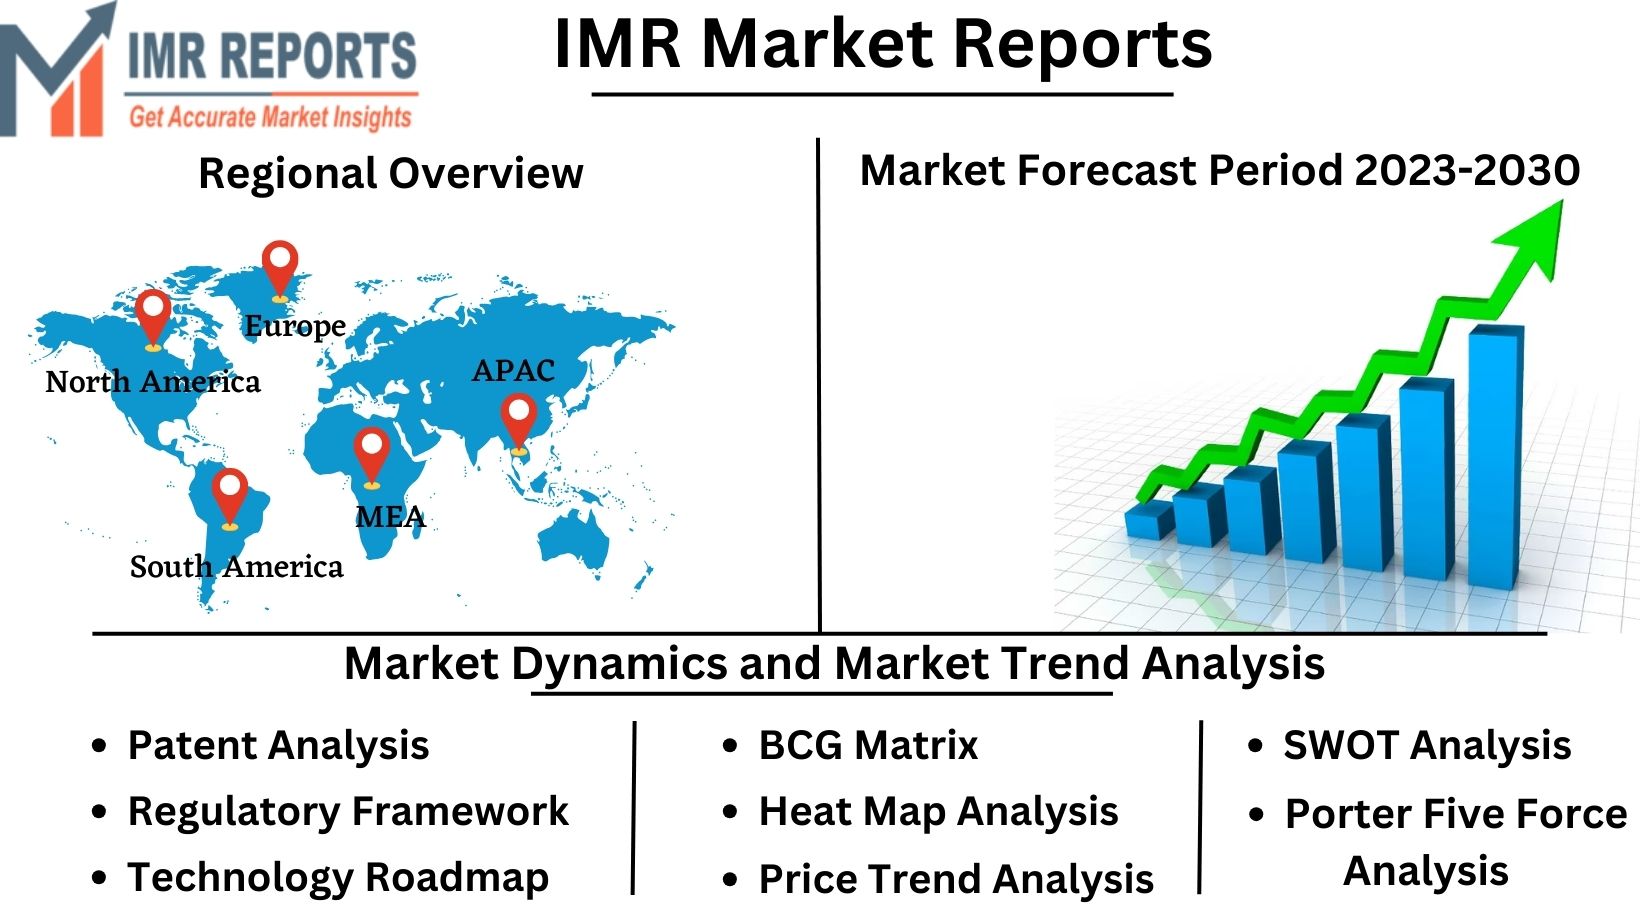 IMR_Market_Reports_(1)81